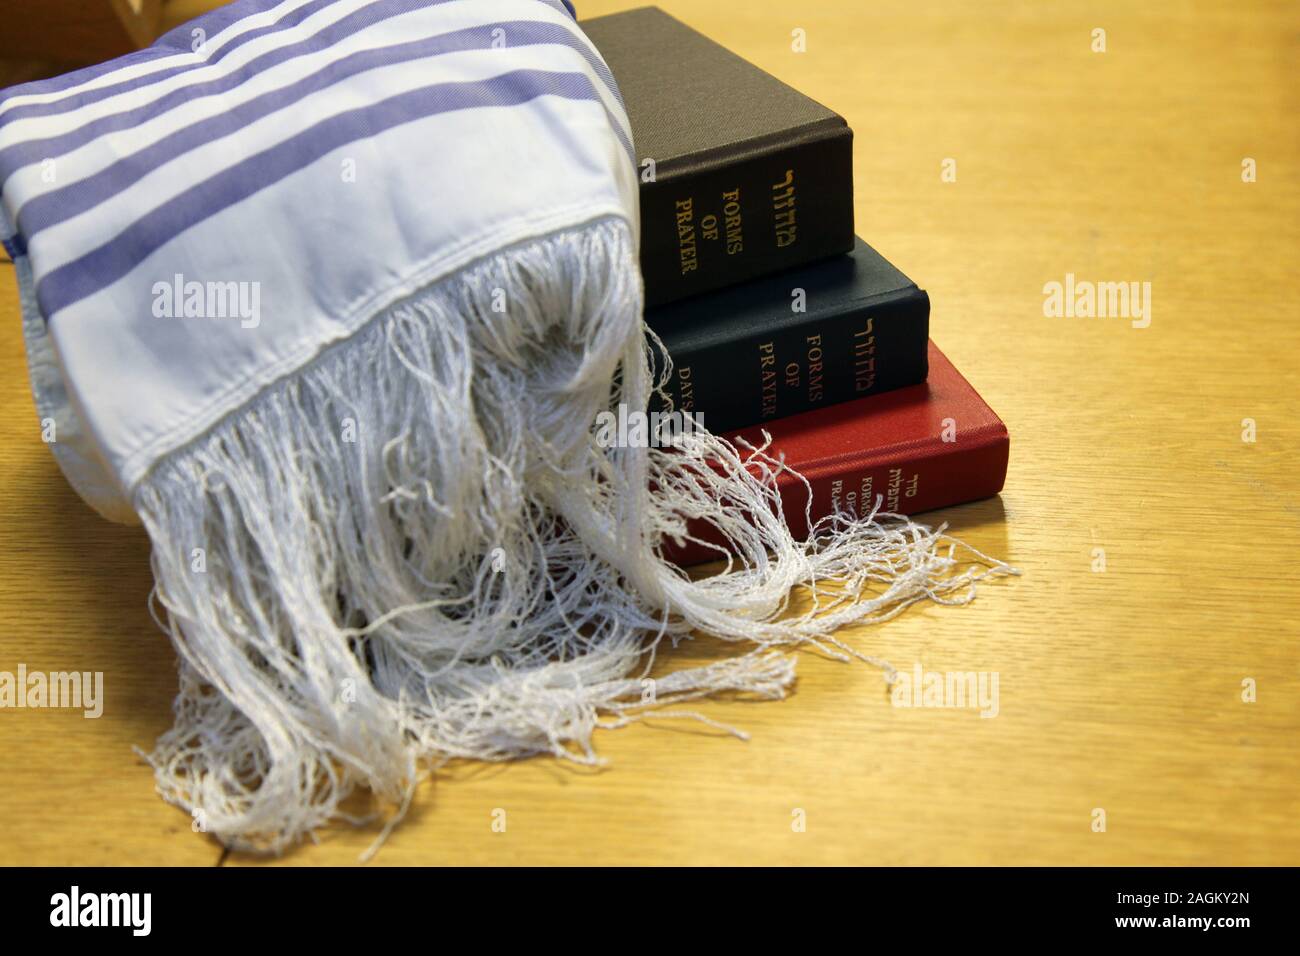 A Jewish shawl 'Tallit' lays over a pile of Jewish prayer books on a table Stock Photo